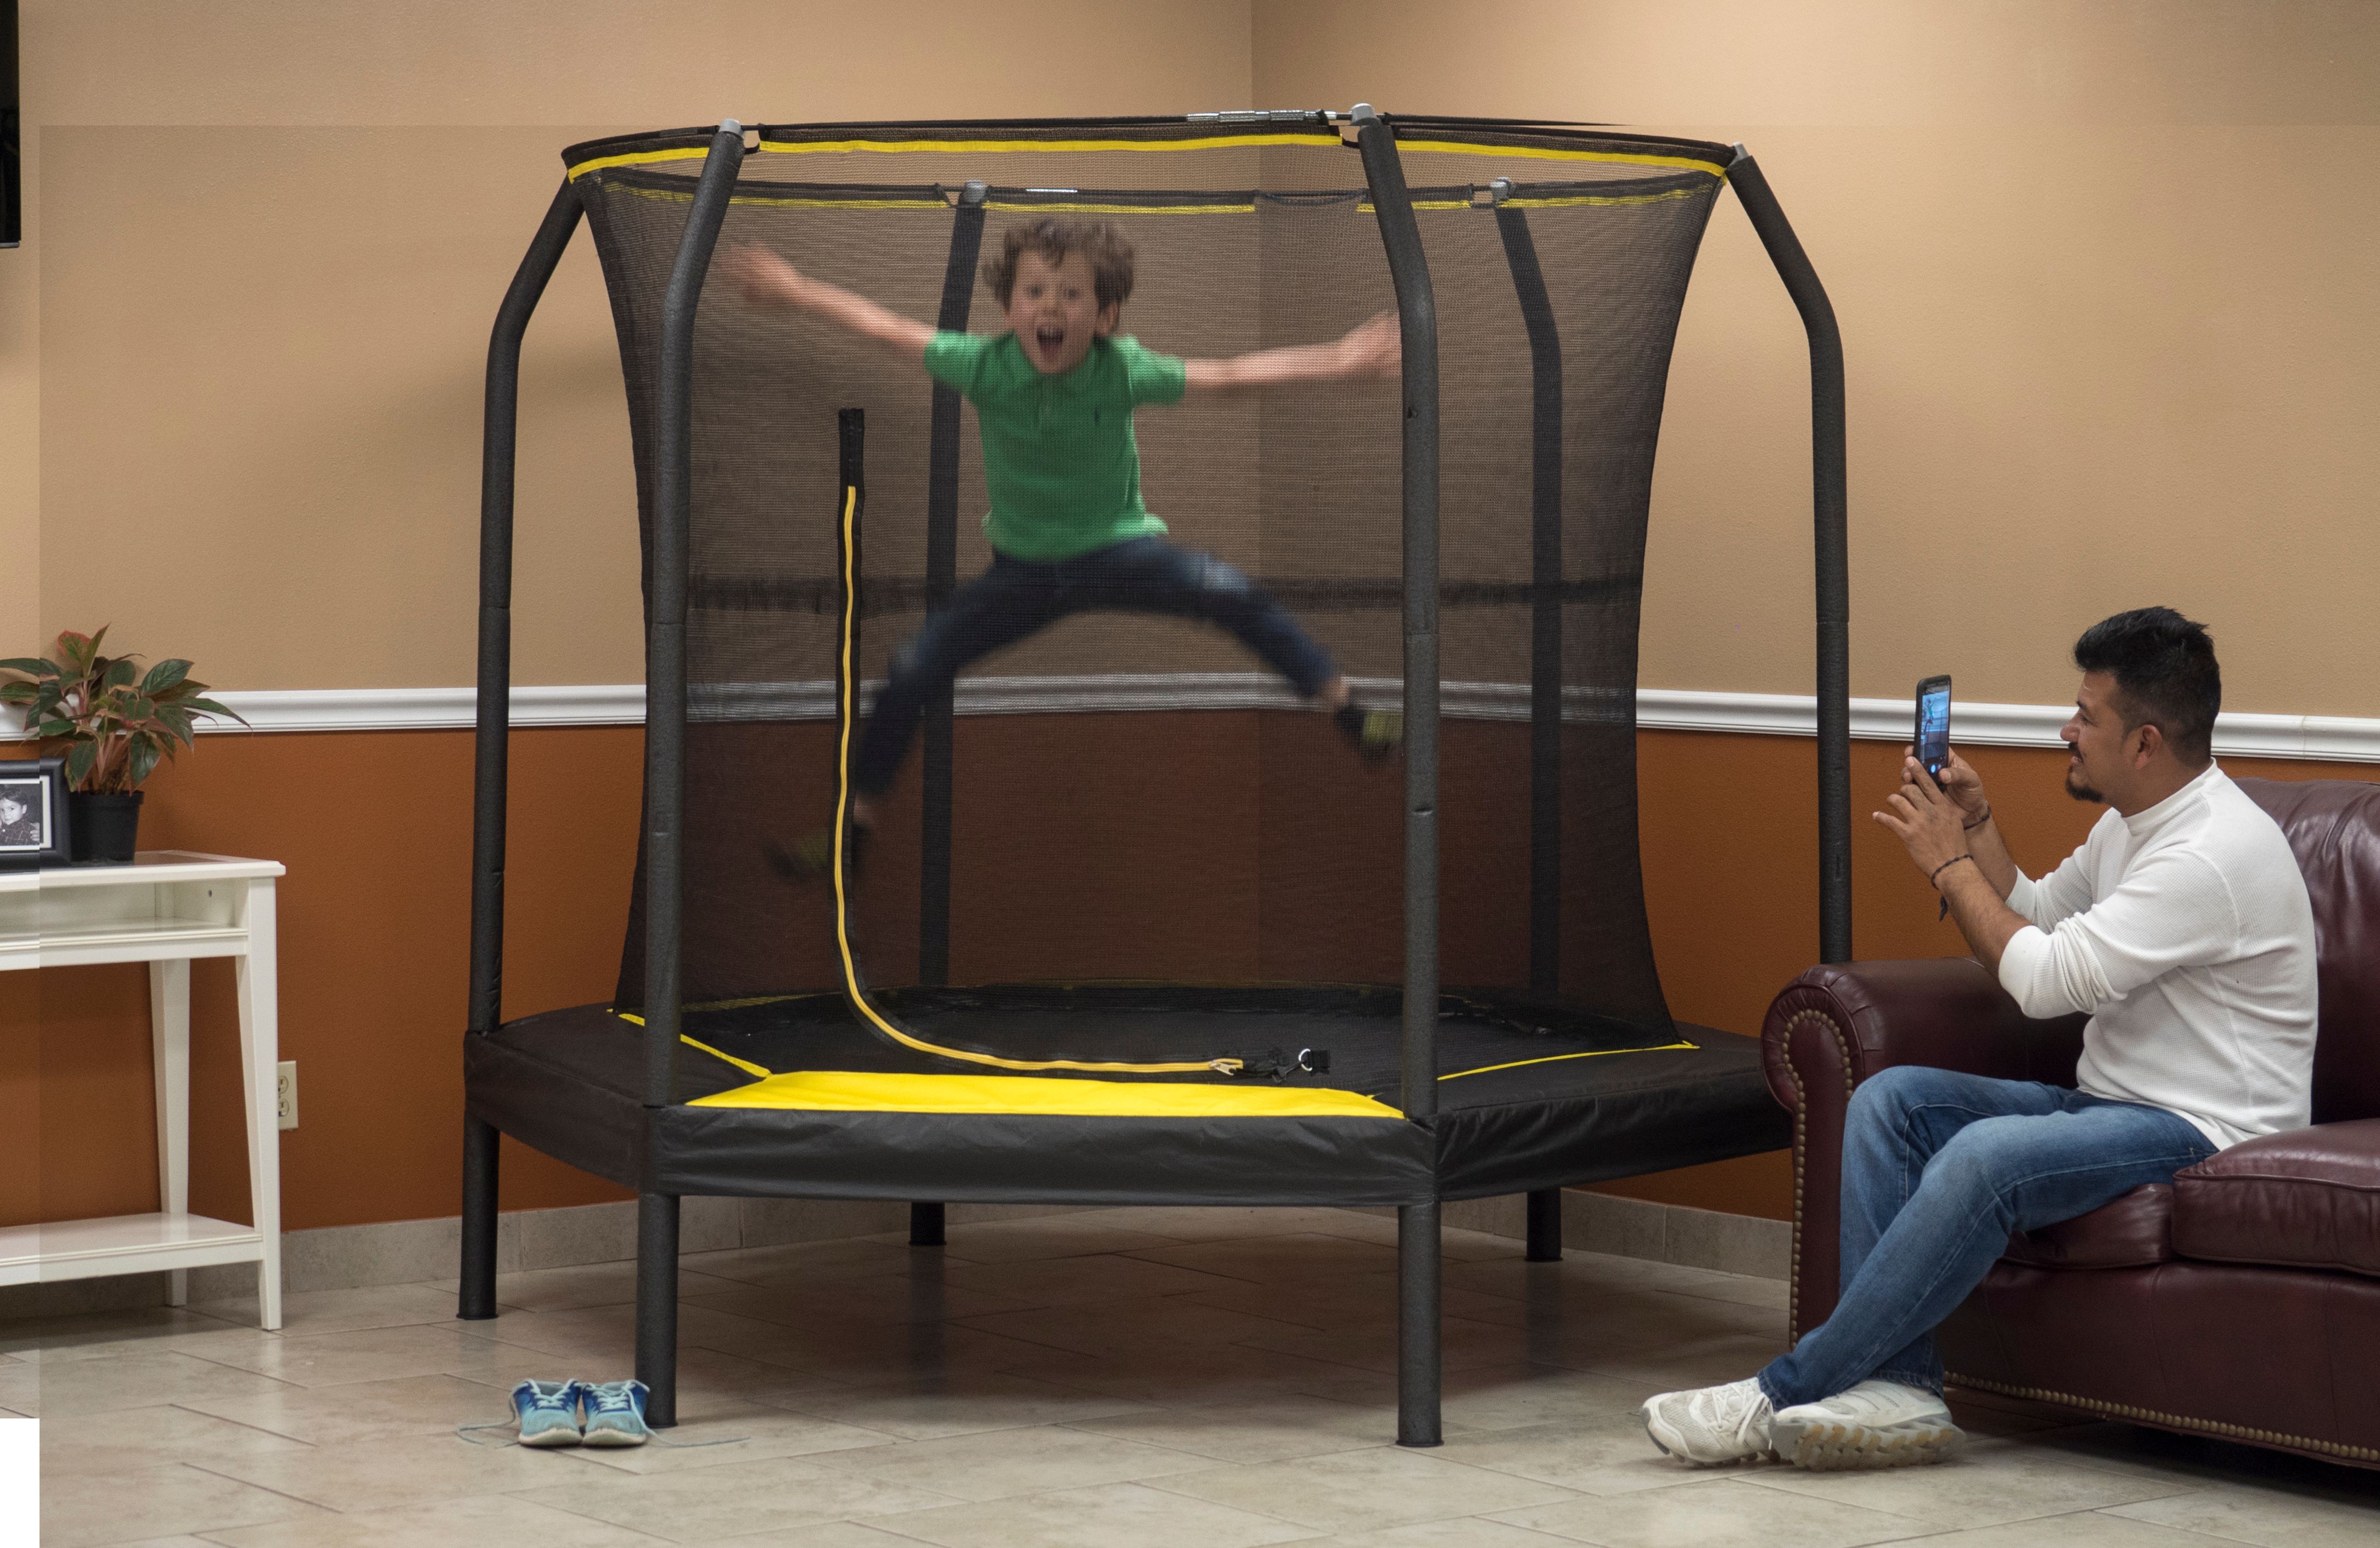 JumpKing 7.5-Foot Trampoline, with Enclosure, Black/Yellow - image 2 of 10